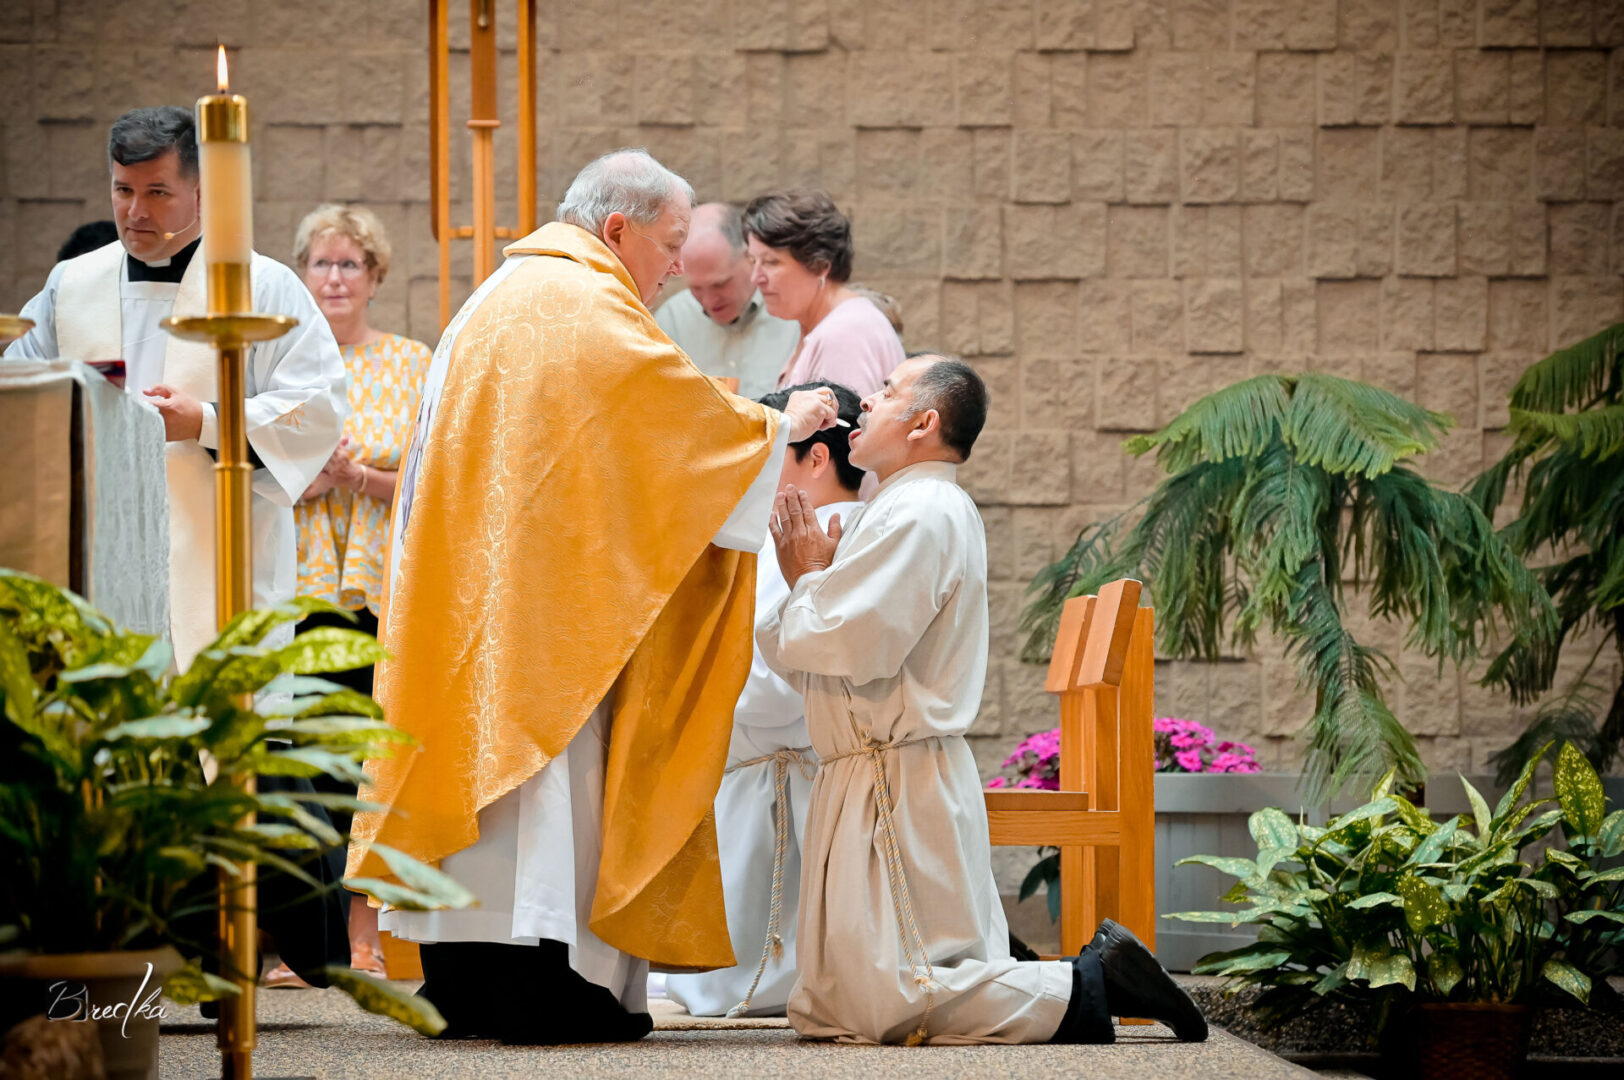 Priest blessing kneeling man during ceremony.